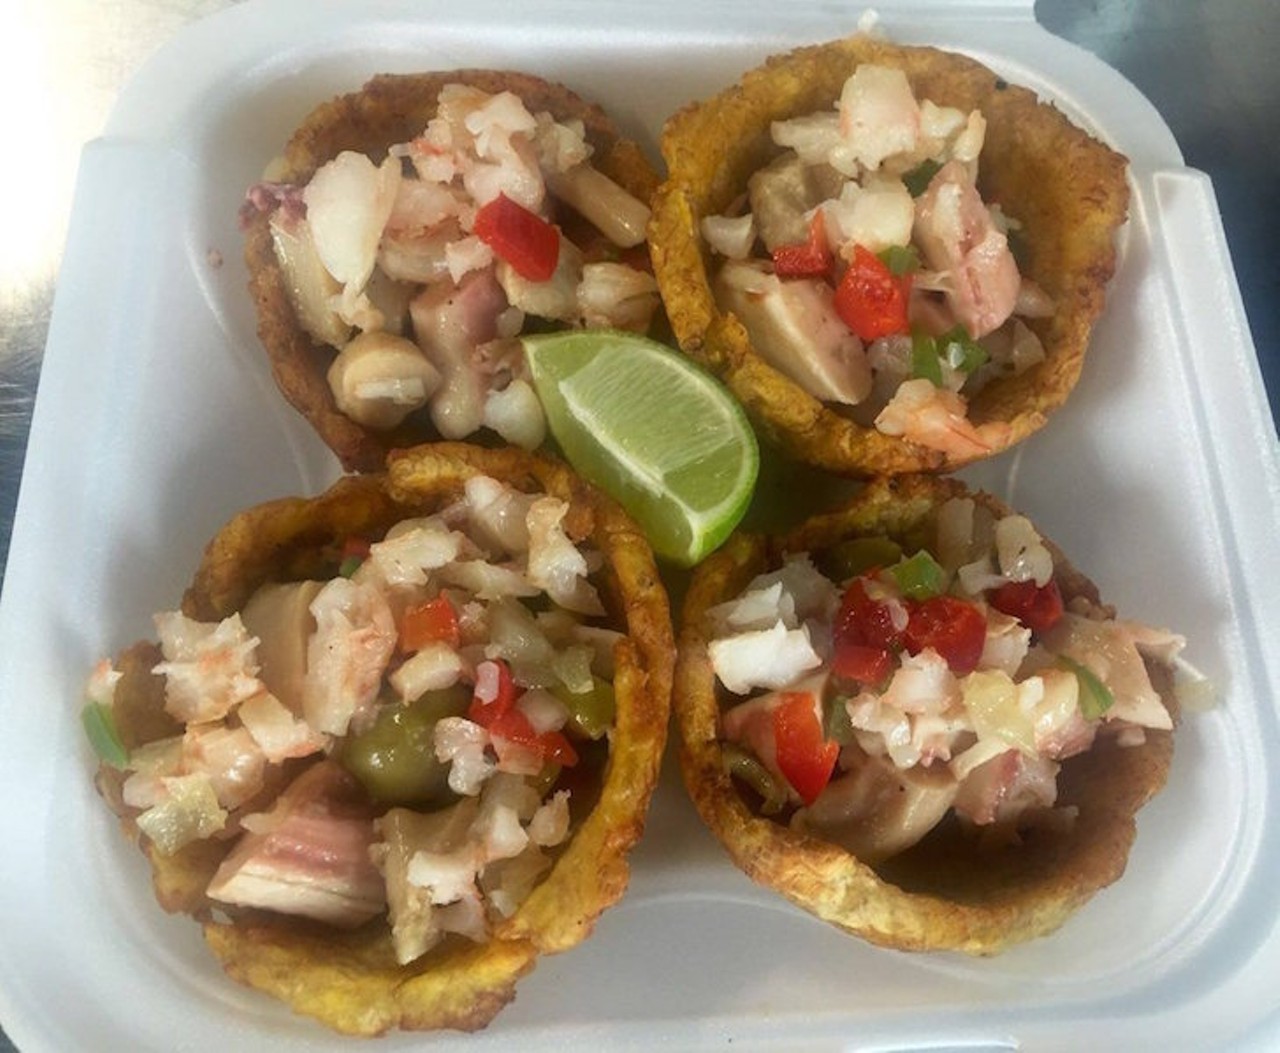 La Fiebre Del Sabor Criollo  
5805 W. Irlo Bronson Memorial Highway, Kissimmee, 407-577-7338
In the vast land of food trucks, this one is sure to stand out. Known for their generous portions of dishes like tostones rellenos,churrasco and jibarito, you won&#146;t want to pass this truck by. 
Photo via Yelp/Damaris N.